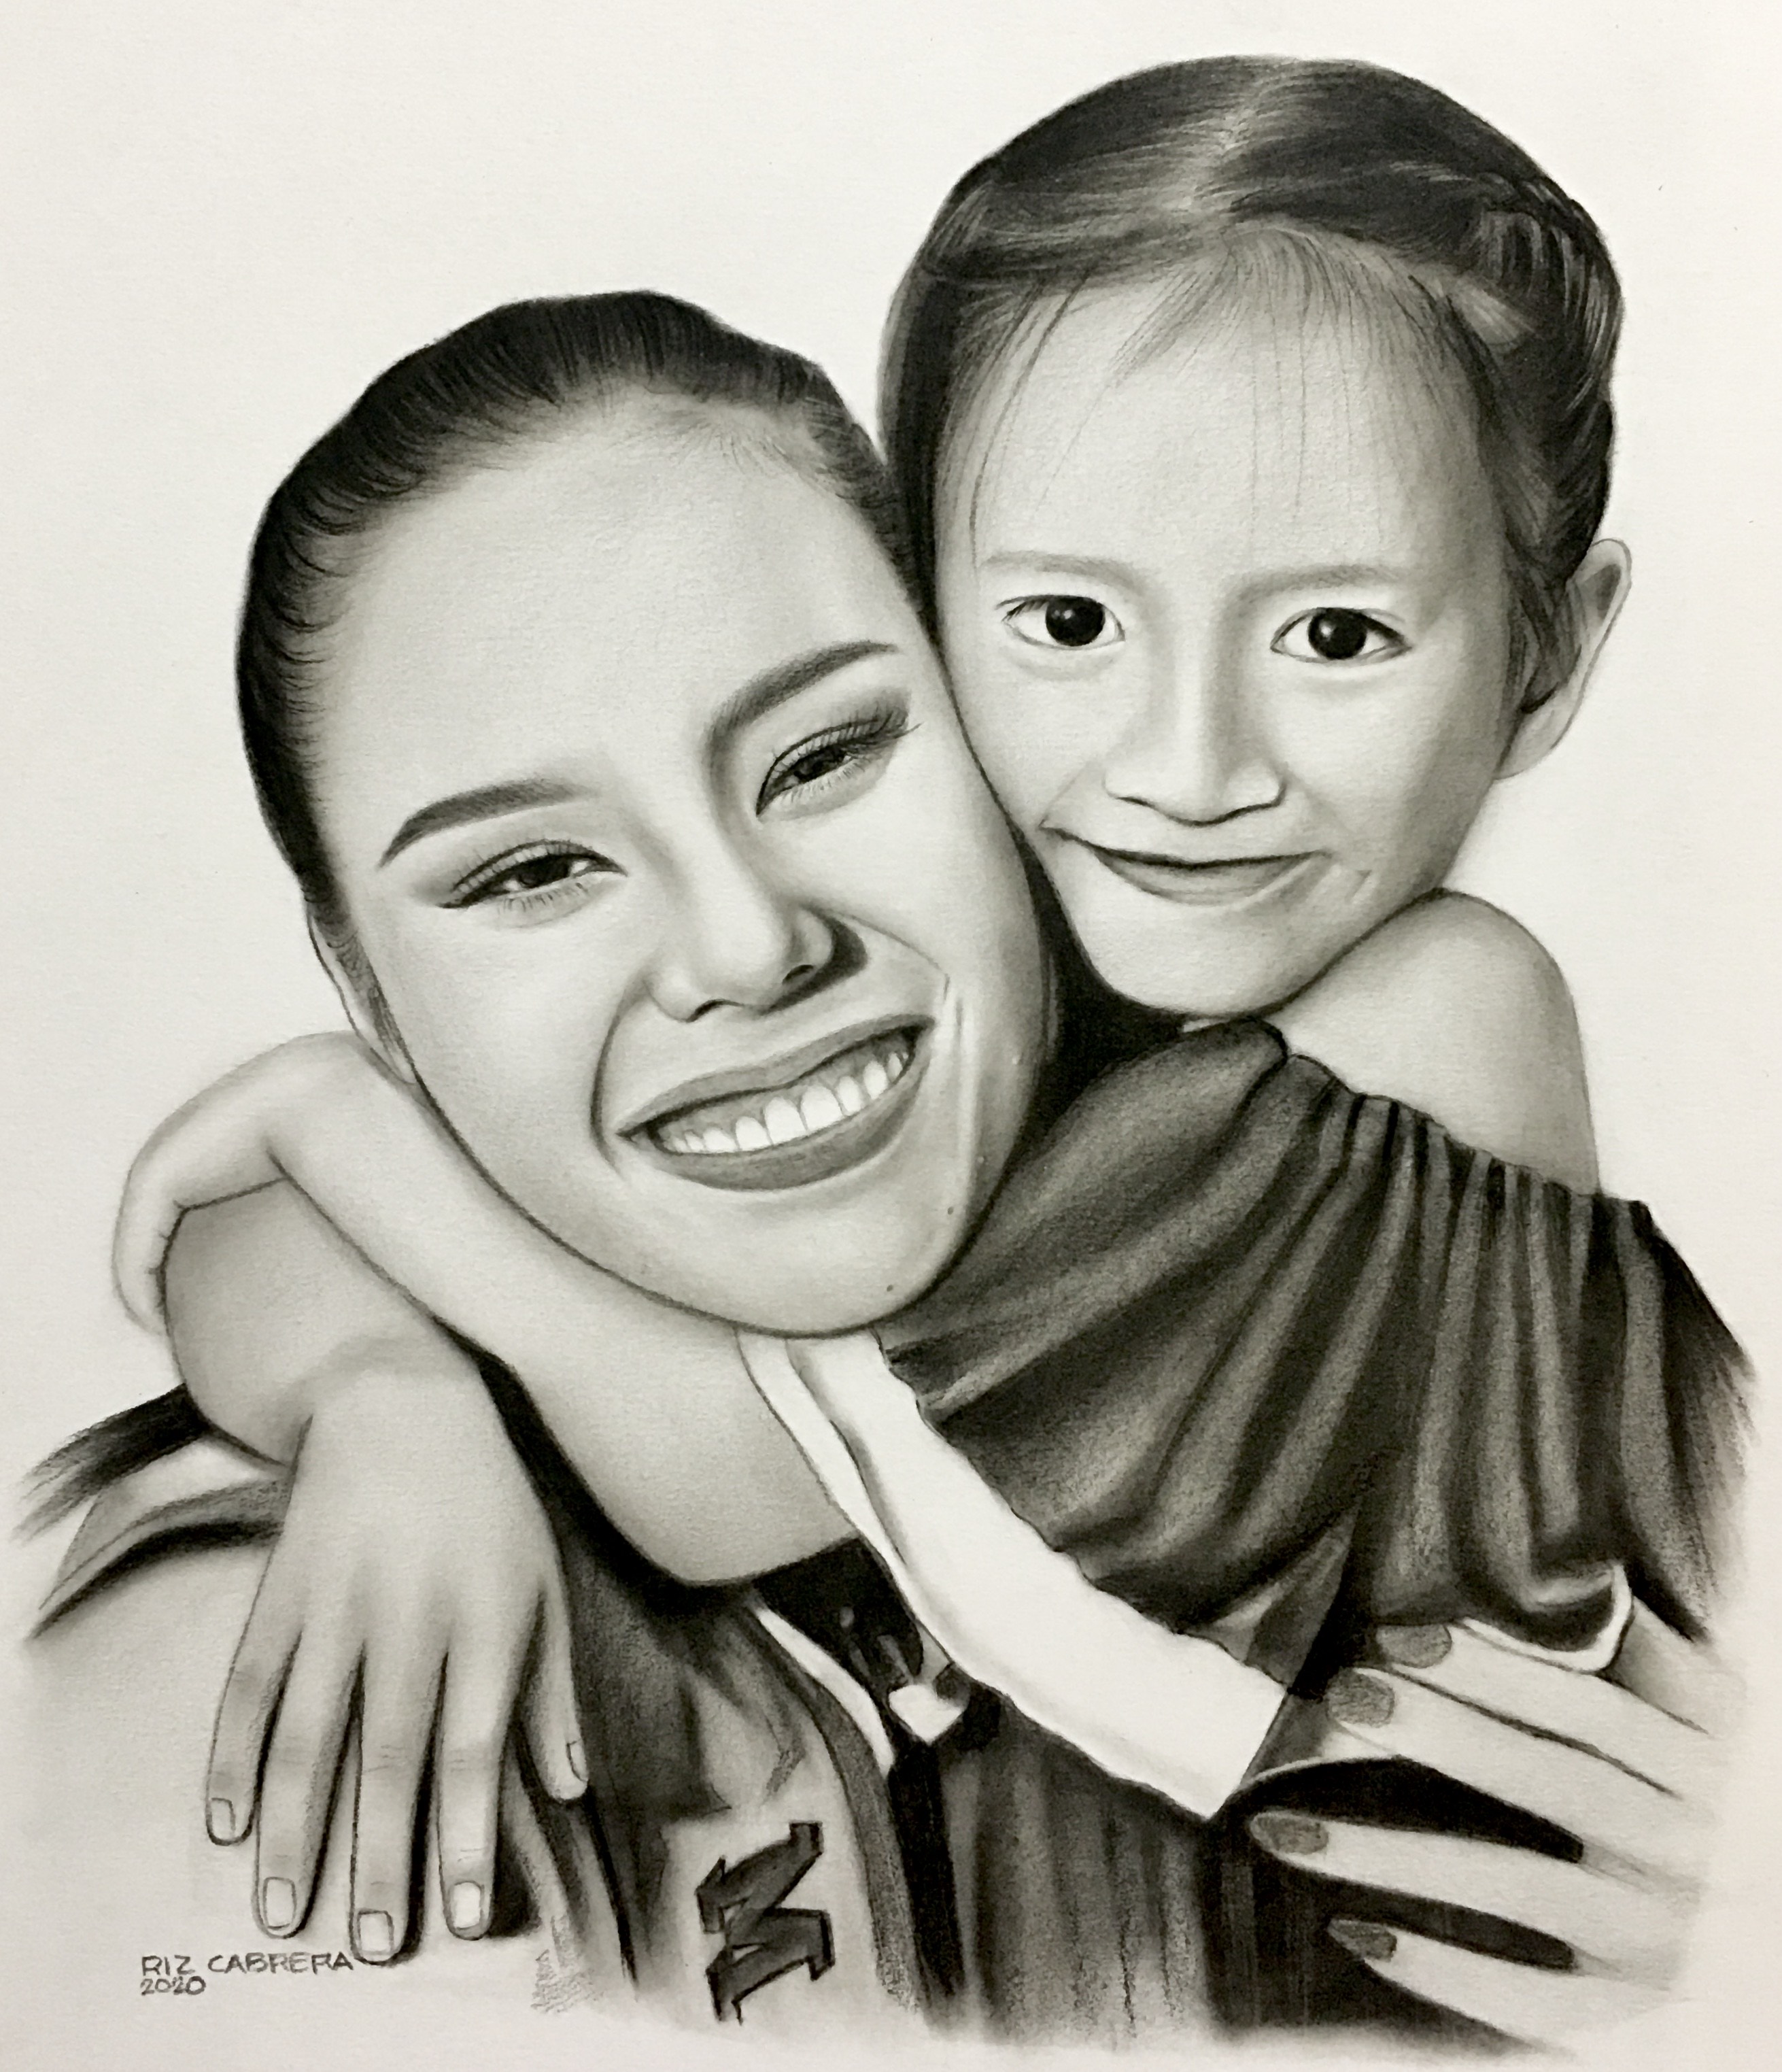 Baguio-based Artist, Riz Cabrera, launches online art auction for Smile Train Philippines